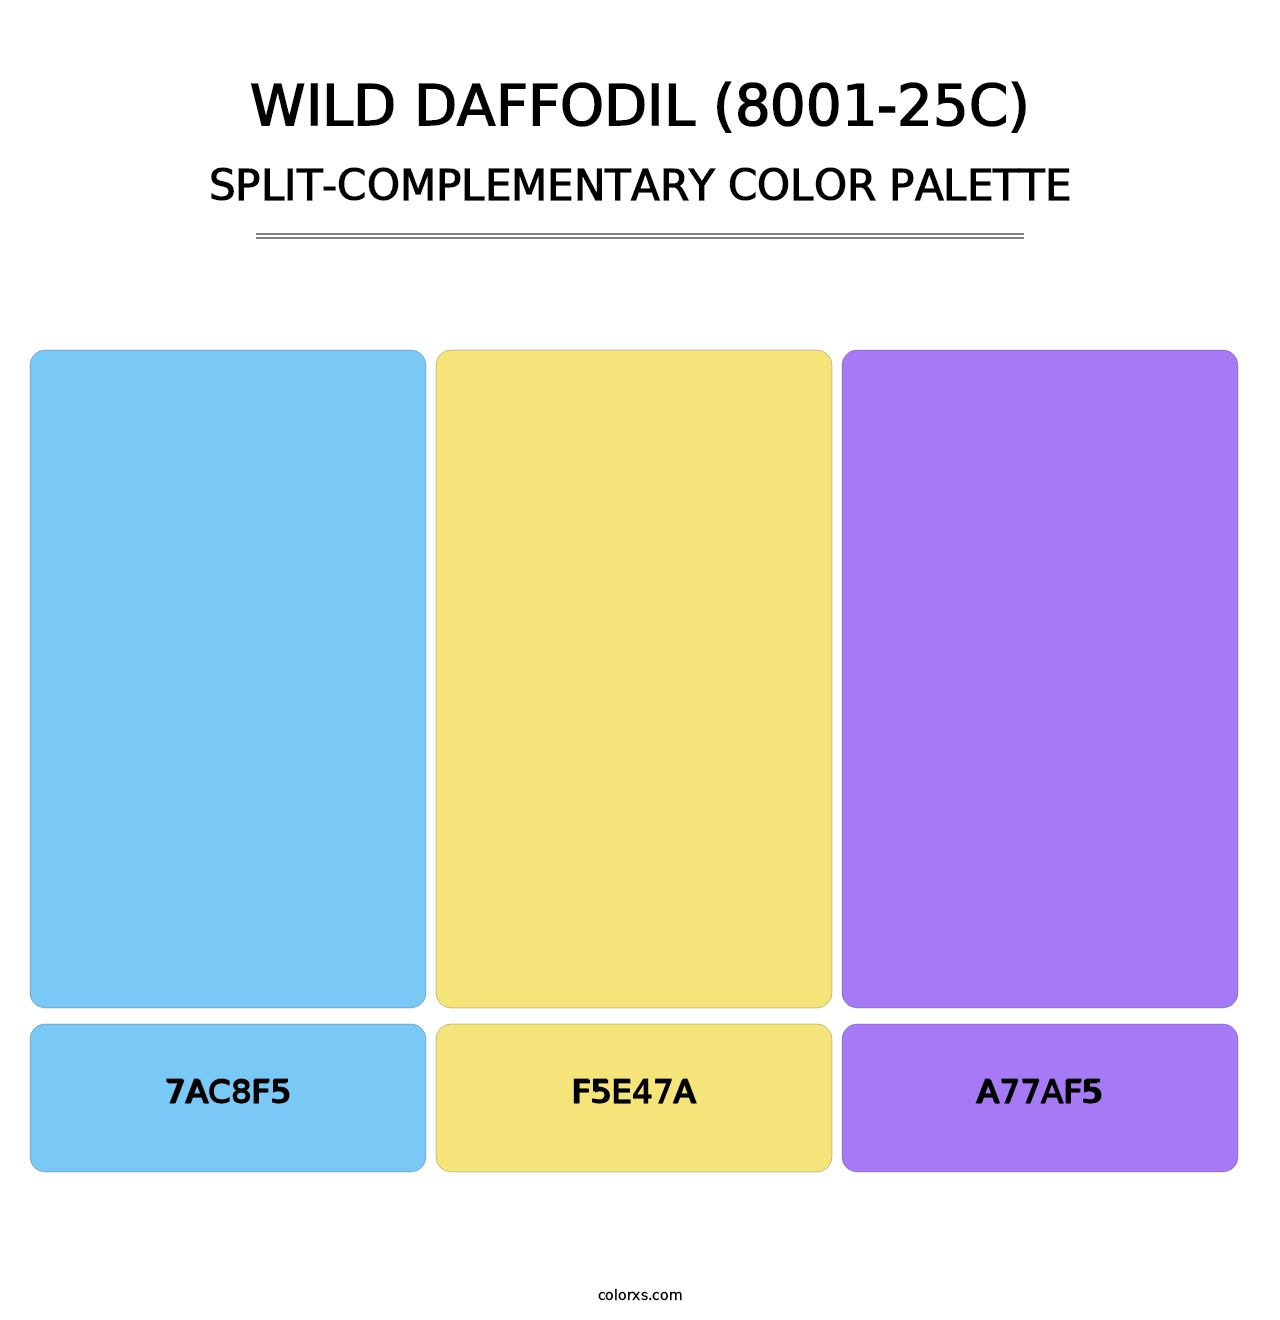 Wild Daffodil (8001-25C) - Split-Complementary Color Palette